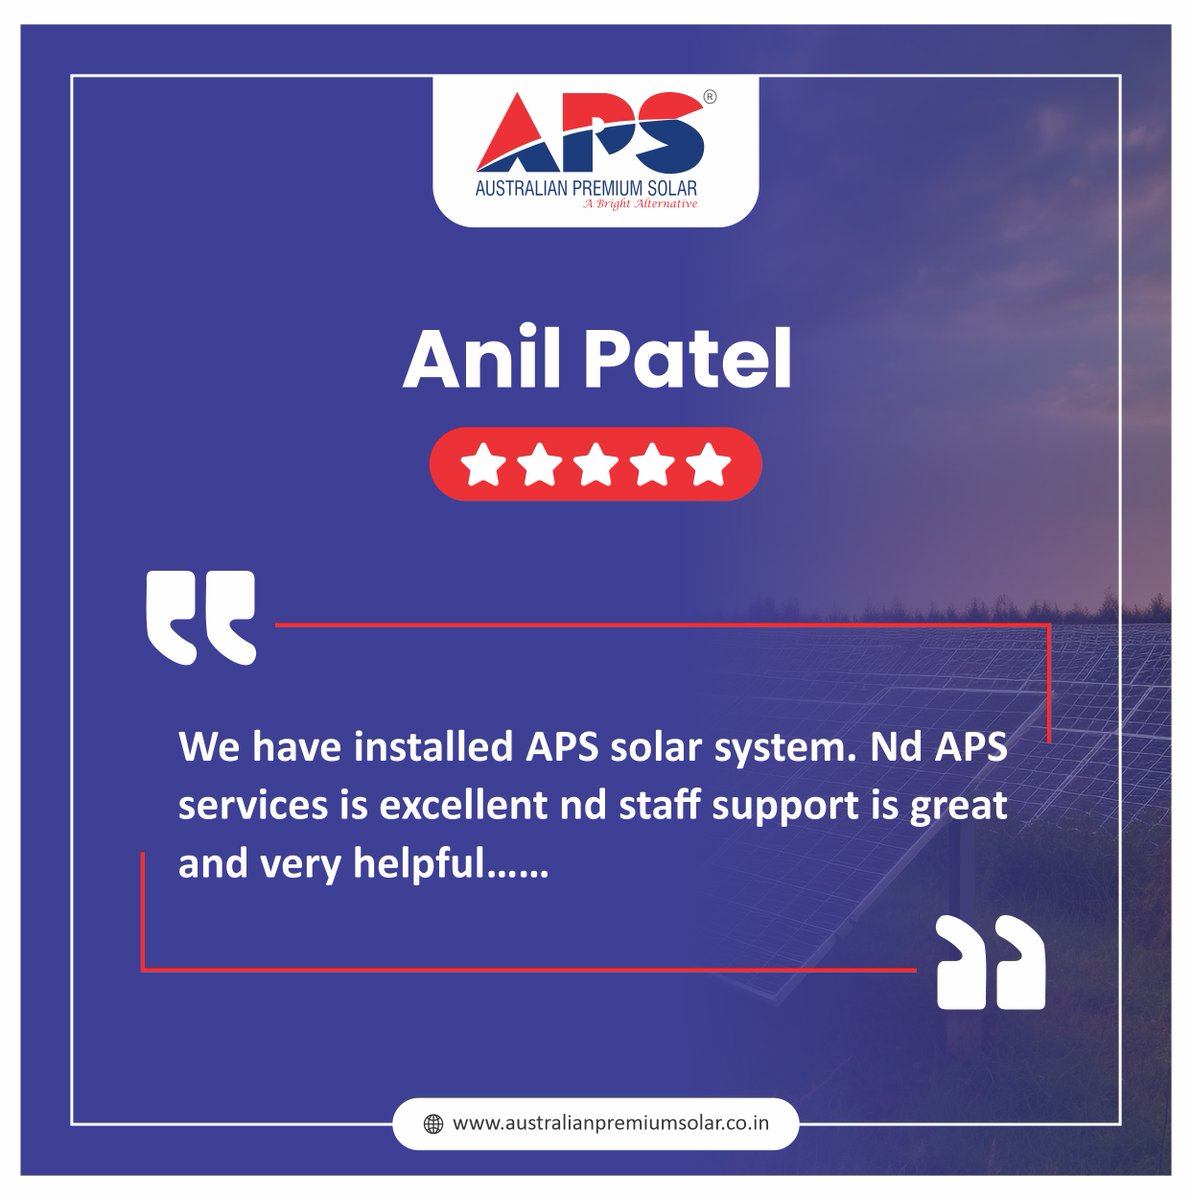 We're thrilled to receive your positive feedback! Providing great service is at the heart of what we do at APS.

Thank you for choosing us, and we look forward to serving you again in the future.

#bifacialsolar #solarsubsidy2024 #solarindustry #solarexperts #GreenEnergyFuture